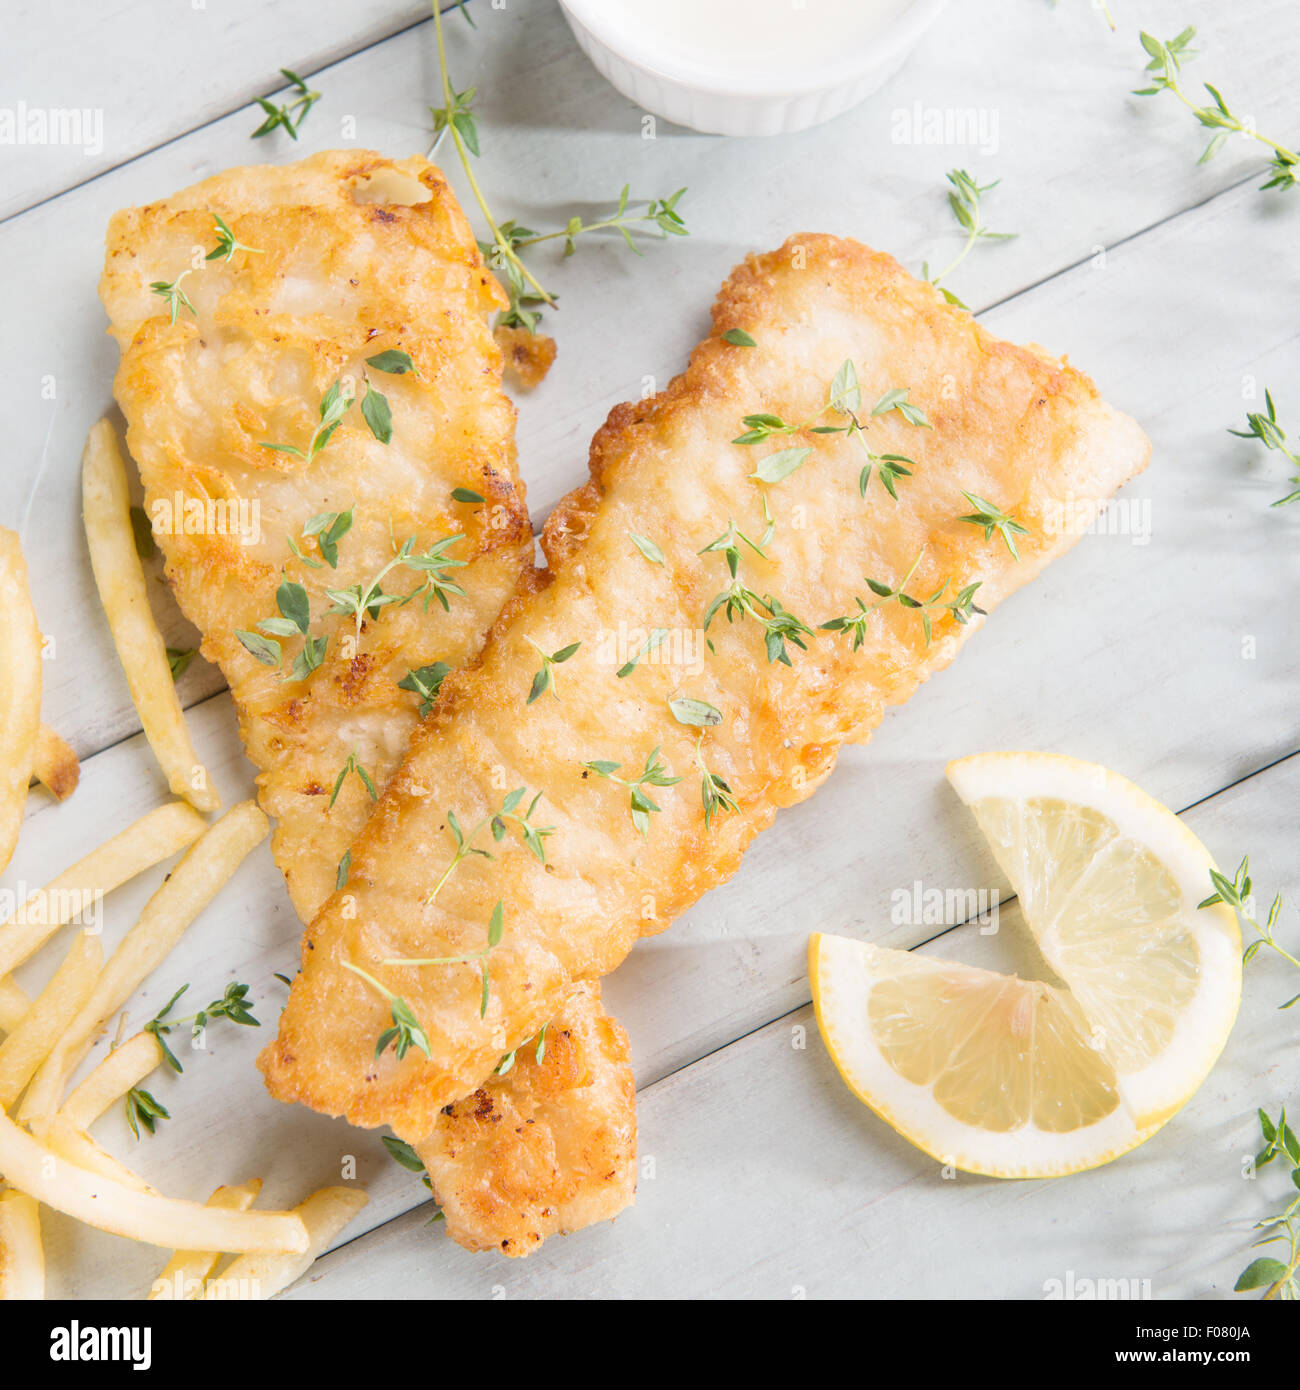 Fish and chips. Above view fried fish fillet with french fries on wooden background. Stock Photo